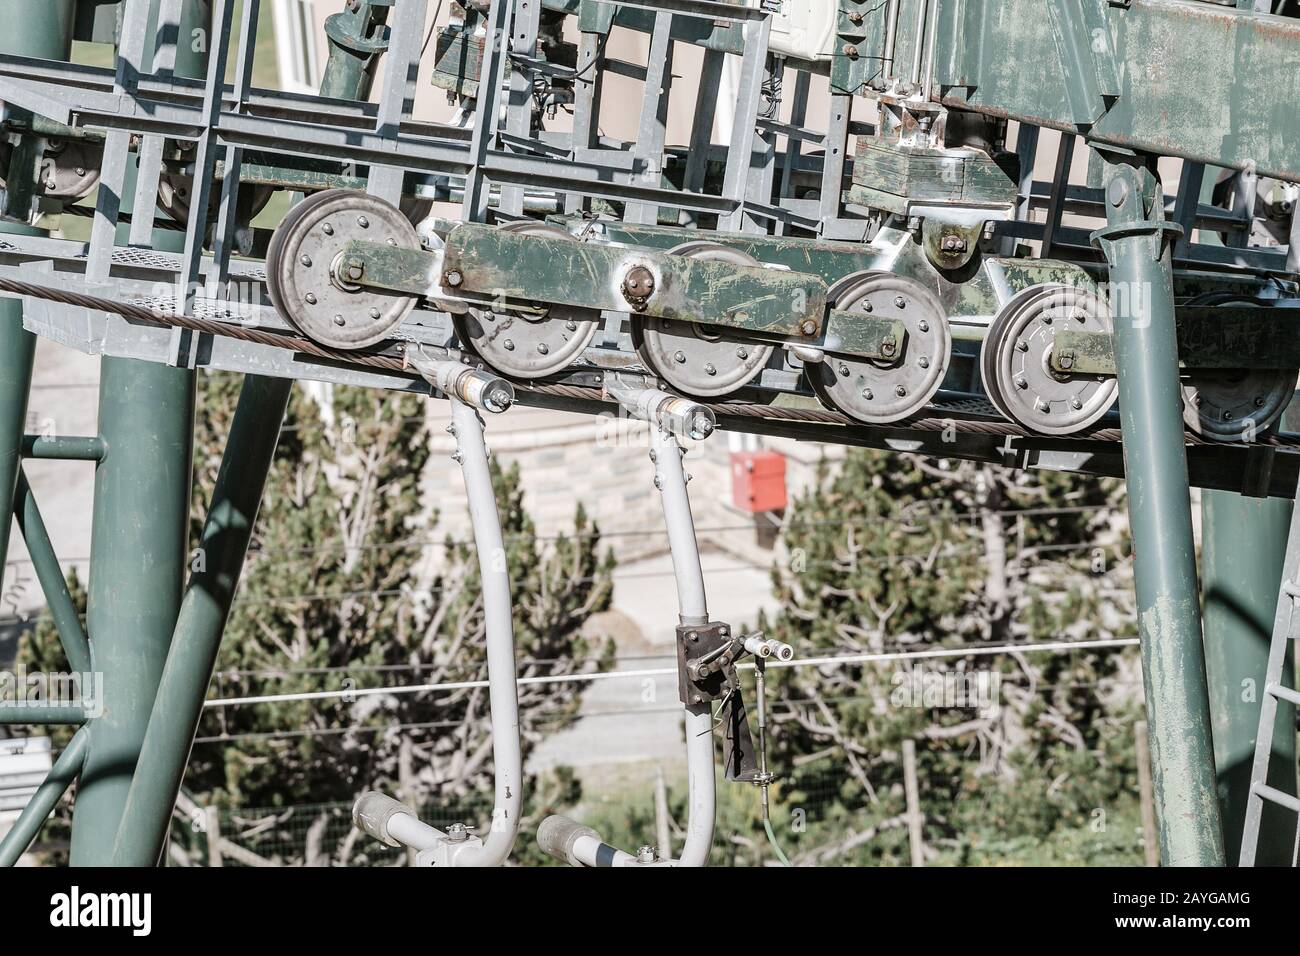 Mechanism of old cable car in the mountains Stock Photo